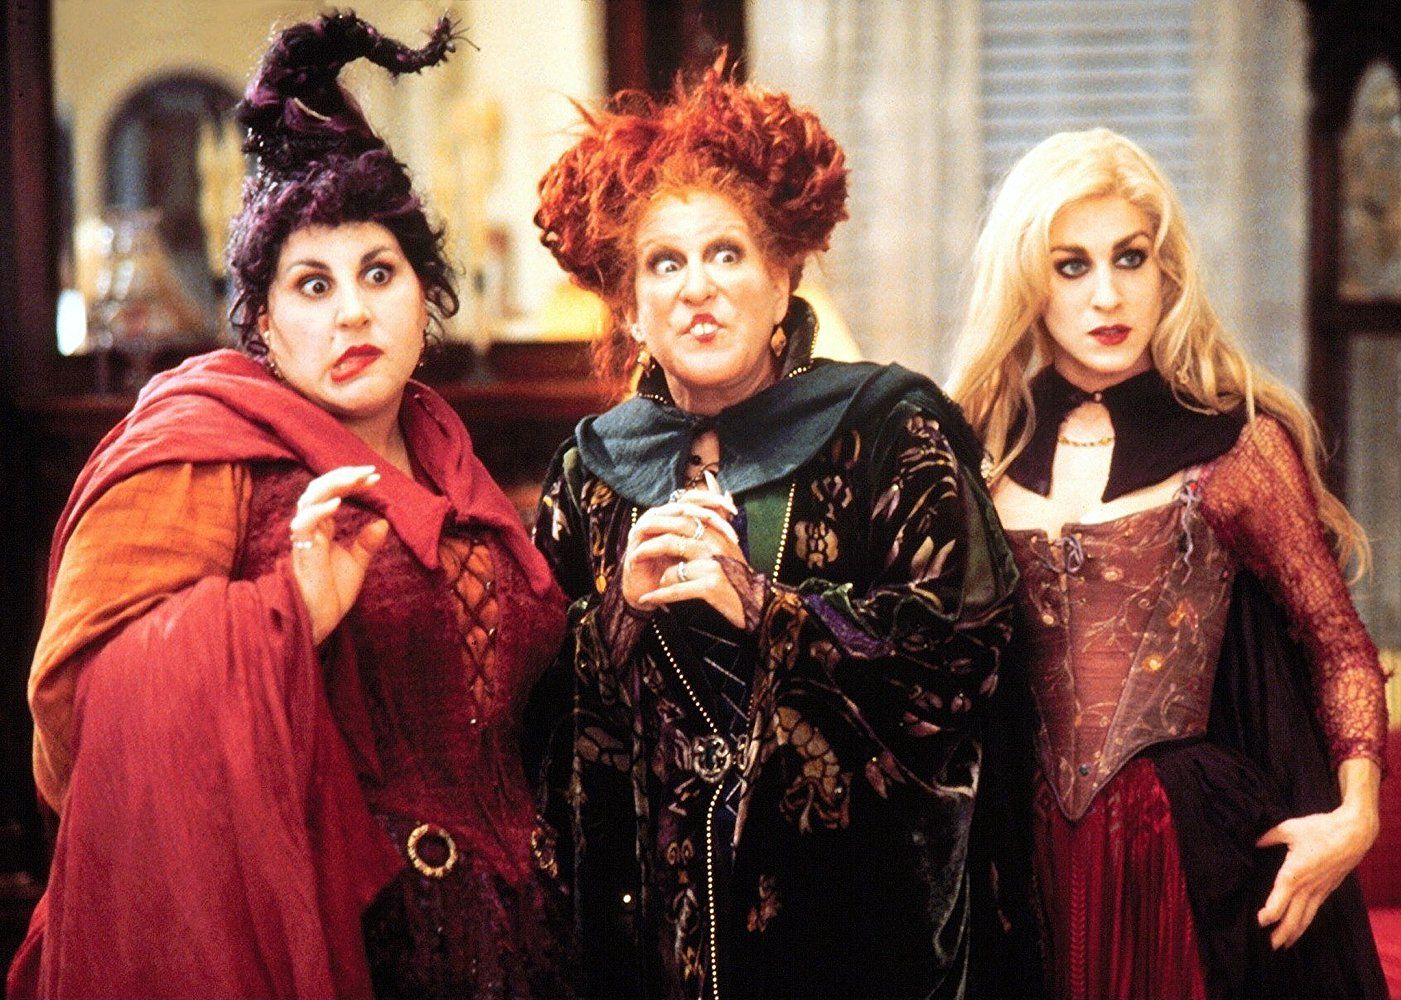  Best Witch Movies to Watch for Halloween